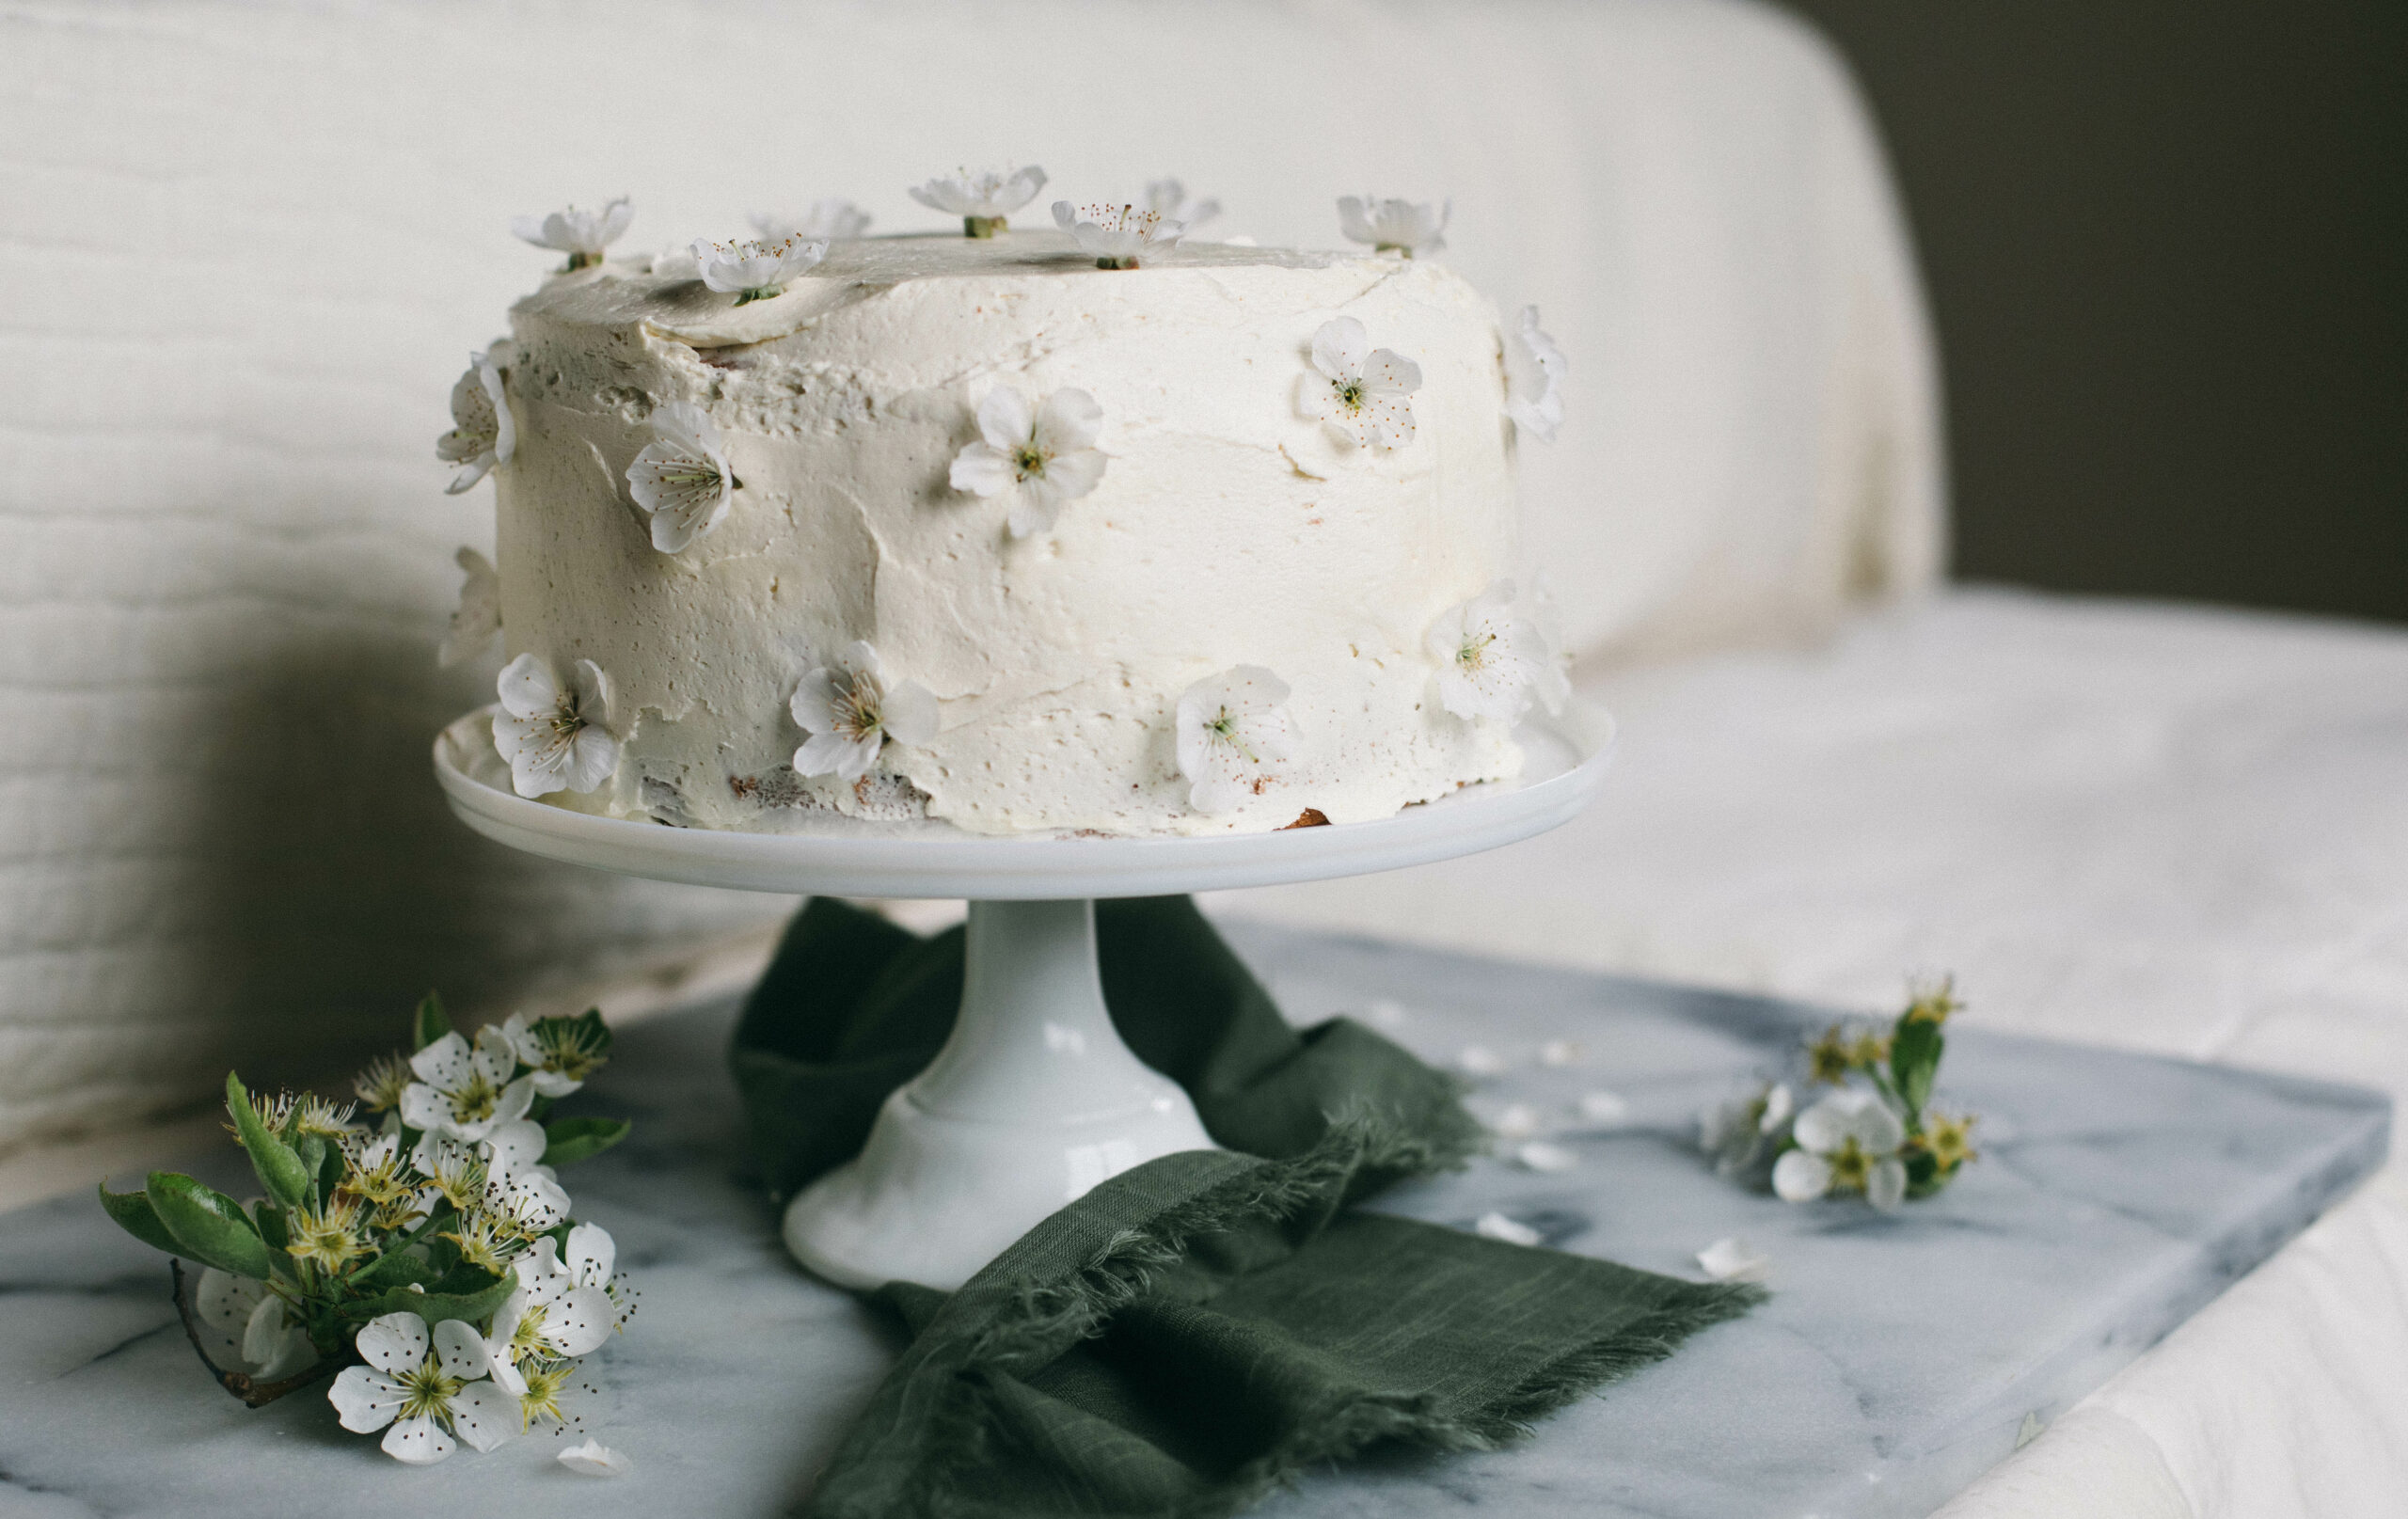 Image of a white Einkorn Sponge cake on a white cake stand with orchard blossoms